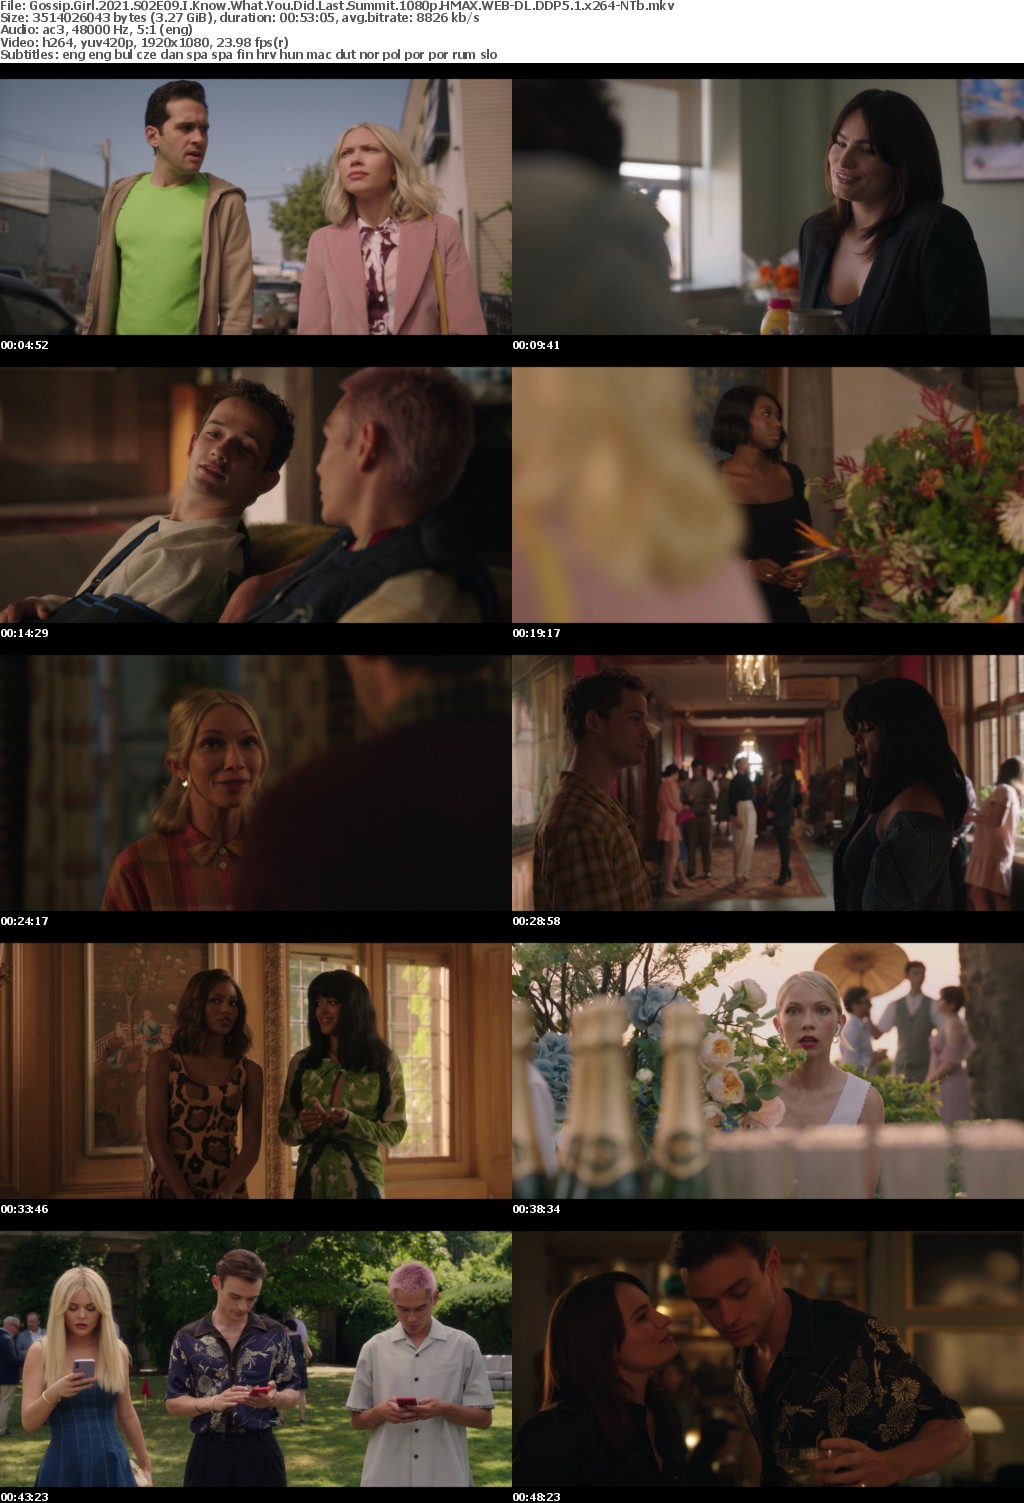 Gossip Girl 2021 S02E09 I Know What You Did Last Summit 1080p HMAX WEBRip DDP5 1 x264-NTb